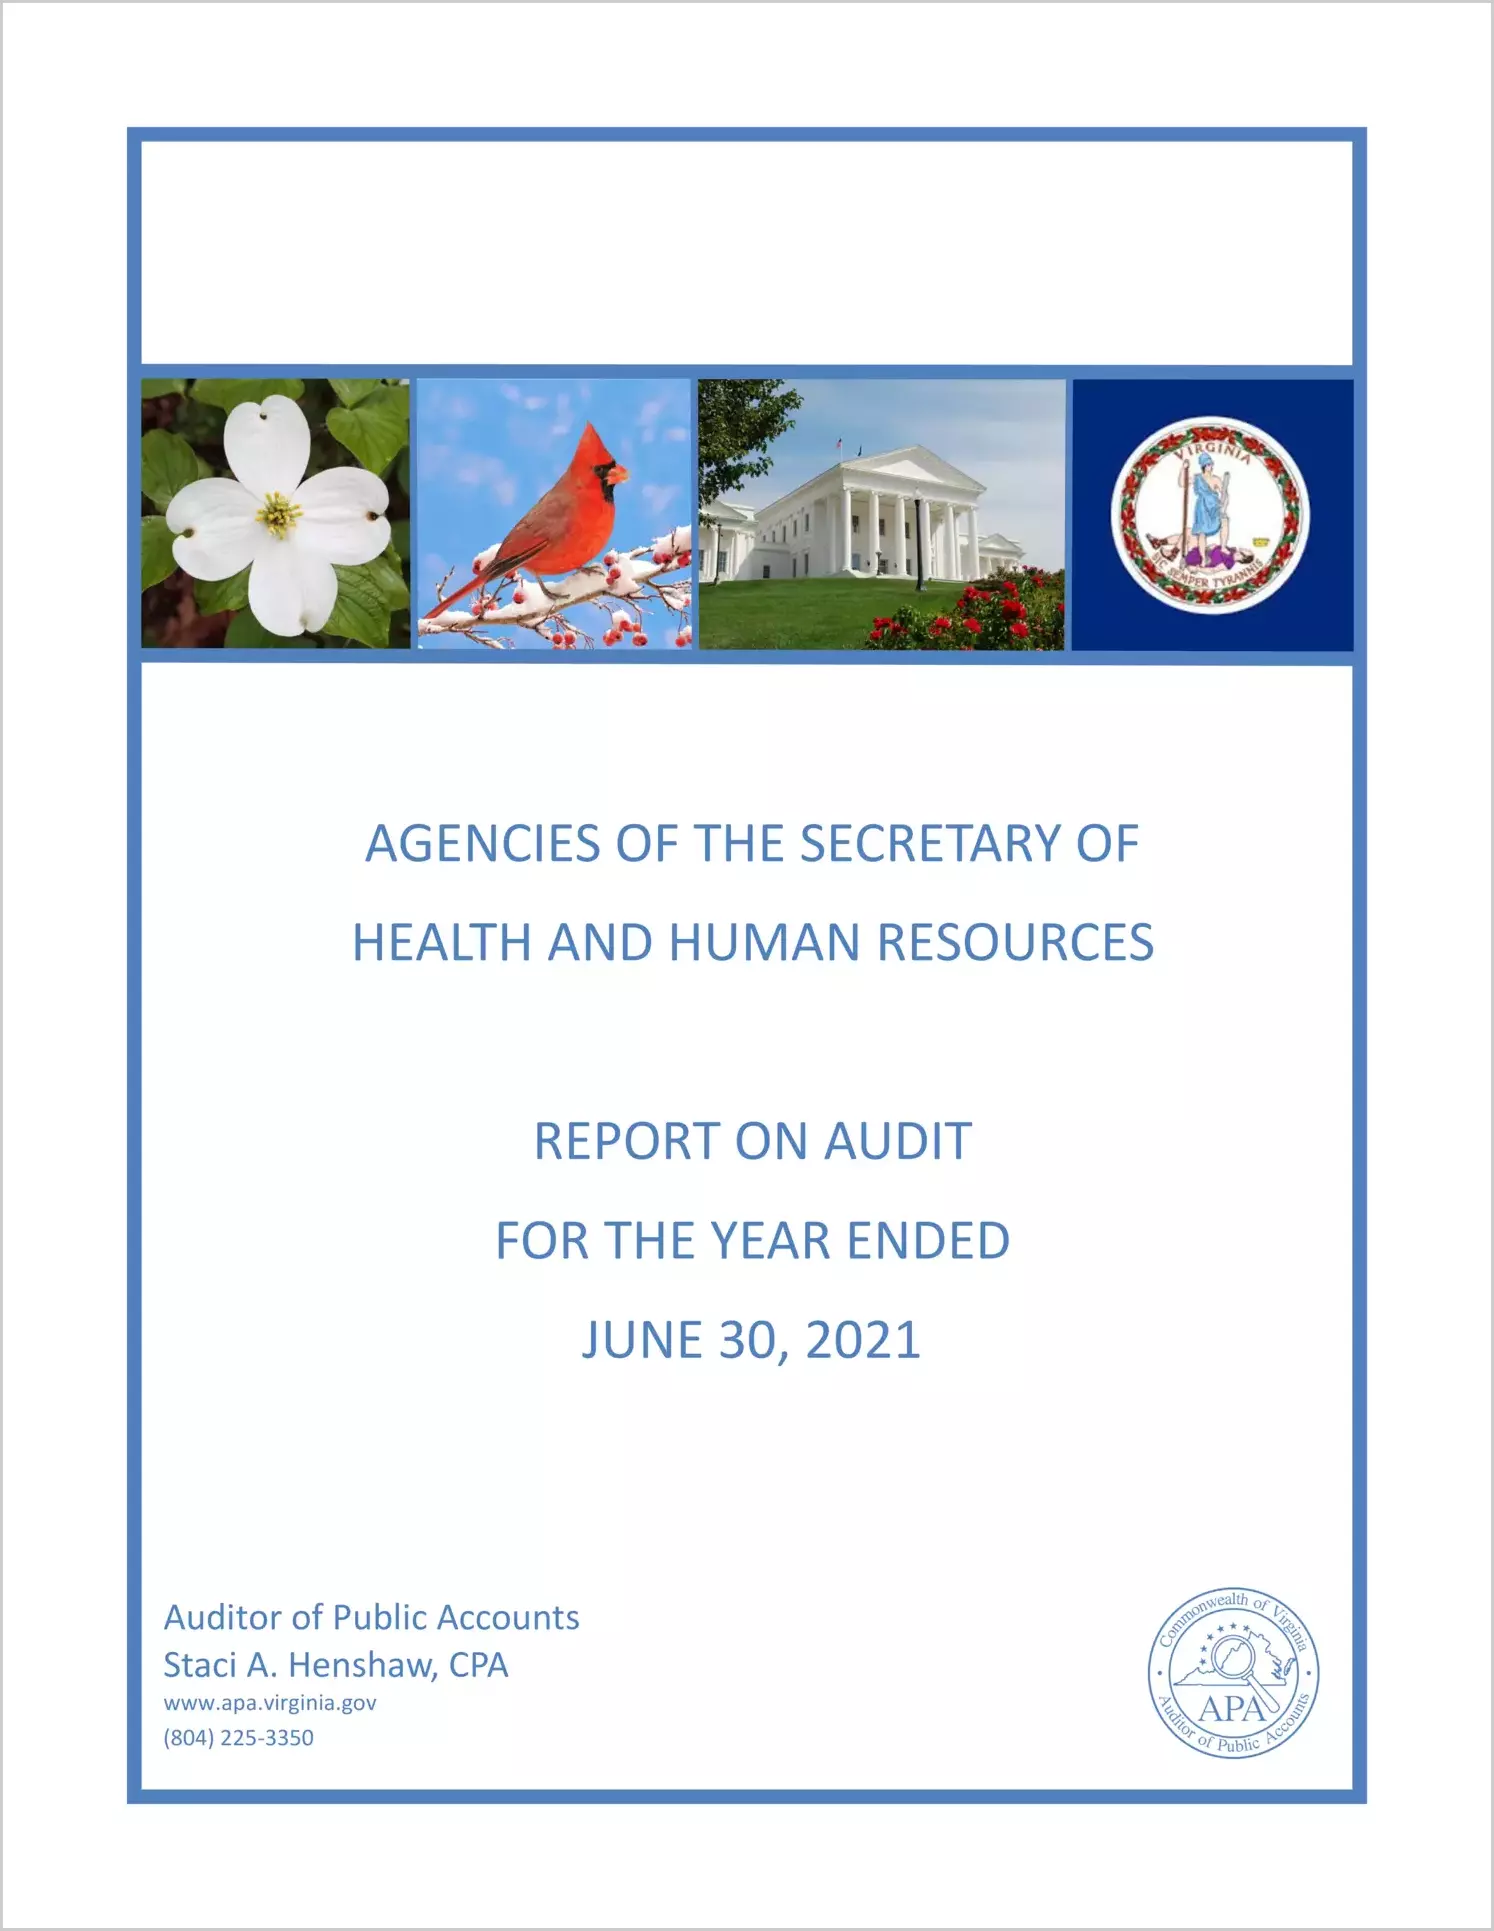 Agencies of the Secretary of Health and Human Resources for the year ended June 30, 2021